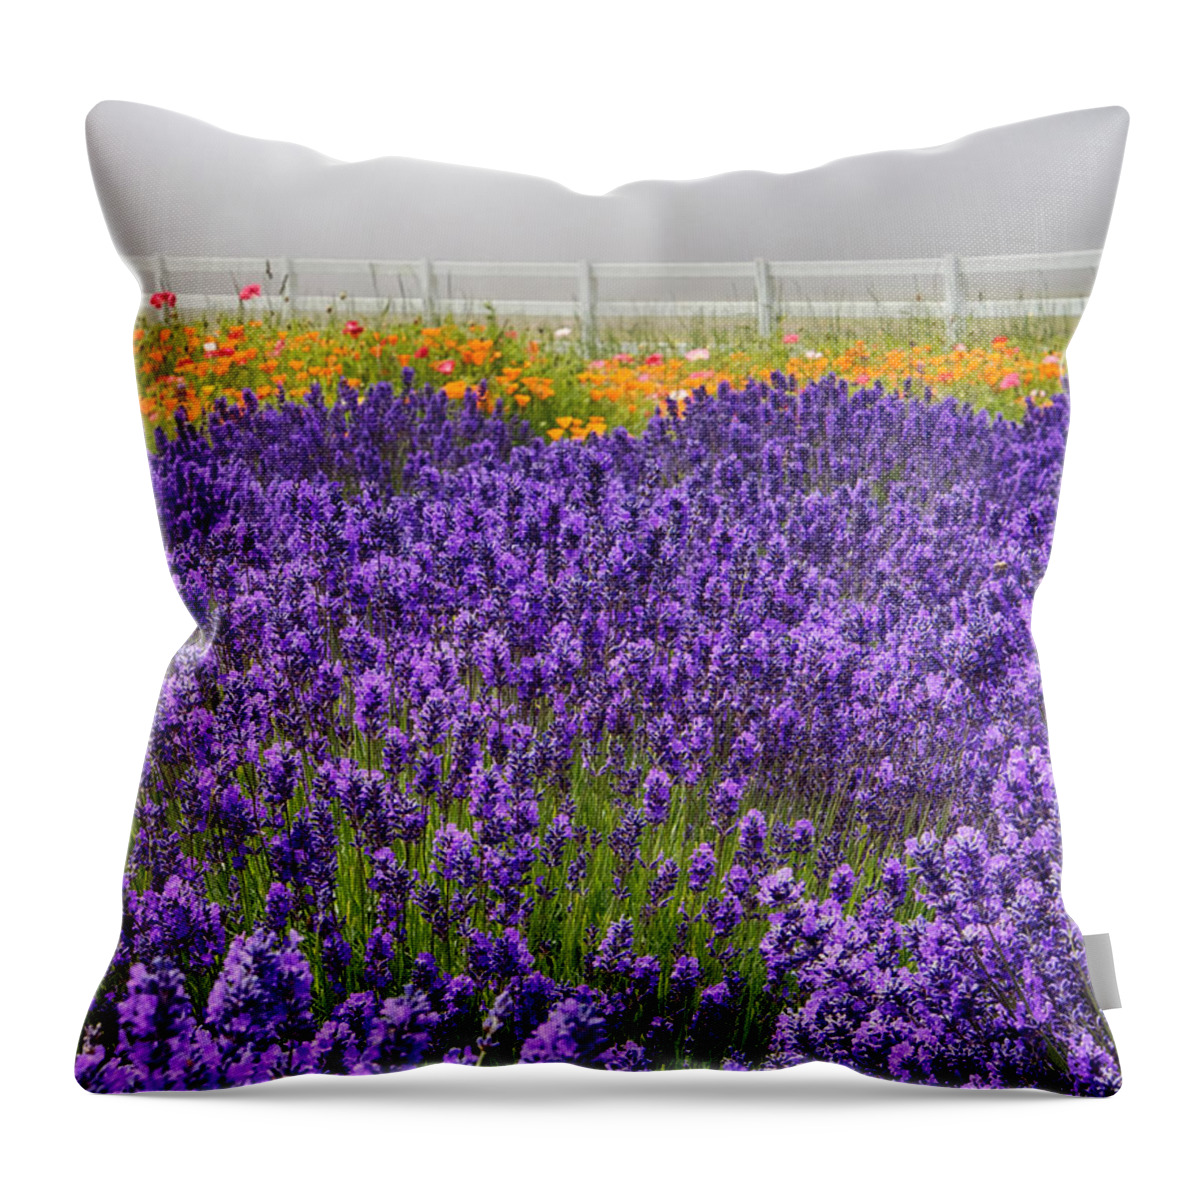 Lavender; Purple; Summer; Sequim; Poppies; White Fence; Fog Throw Pillow featuring the photograph All Fenced In by Eggers Photography